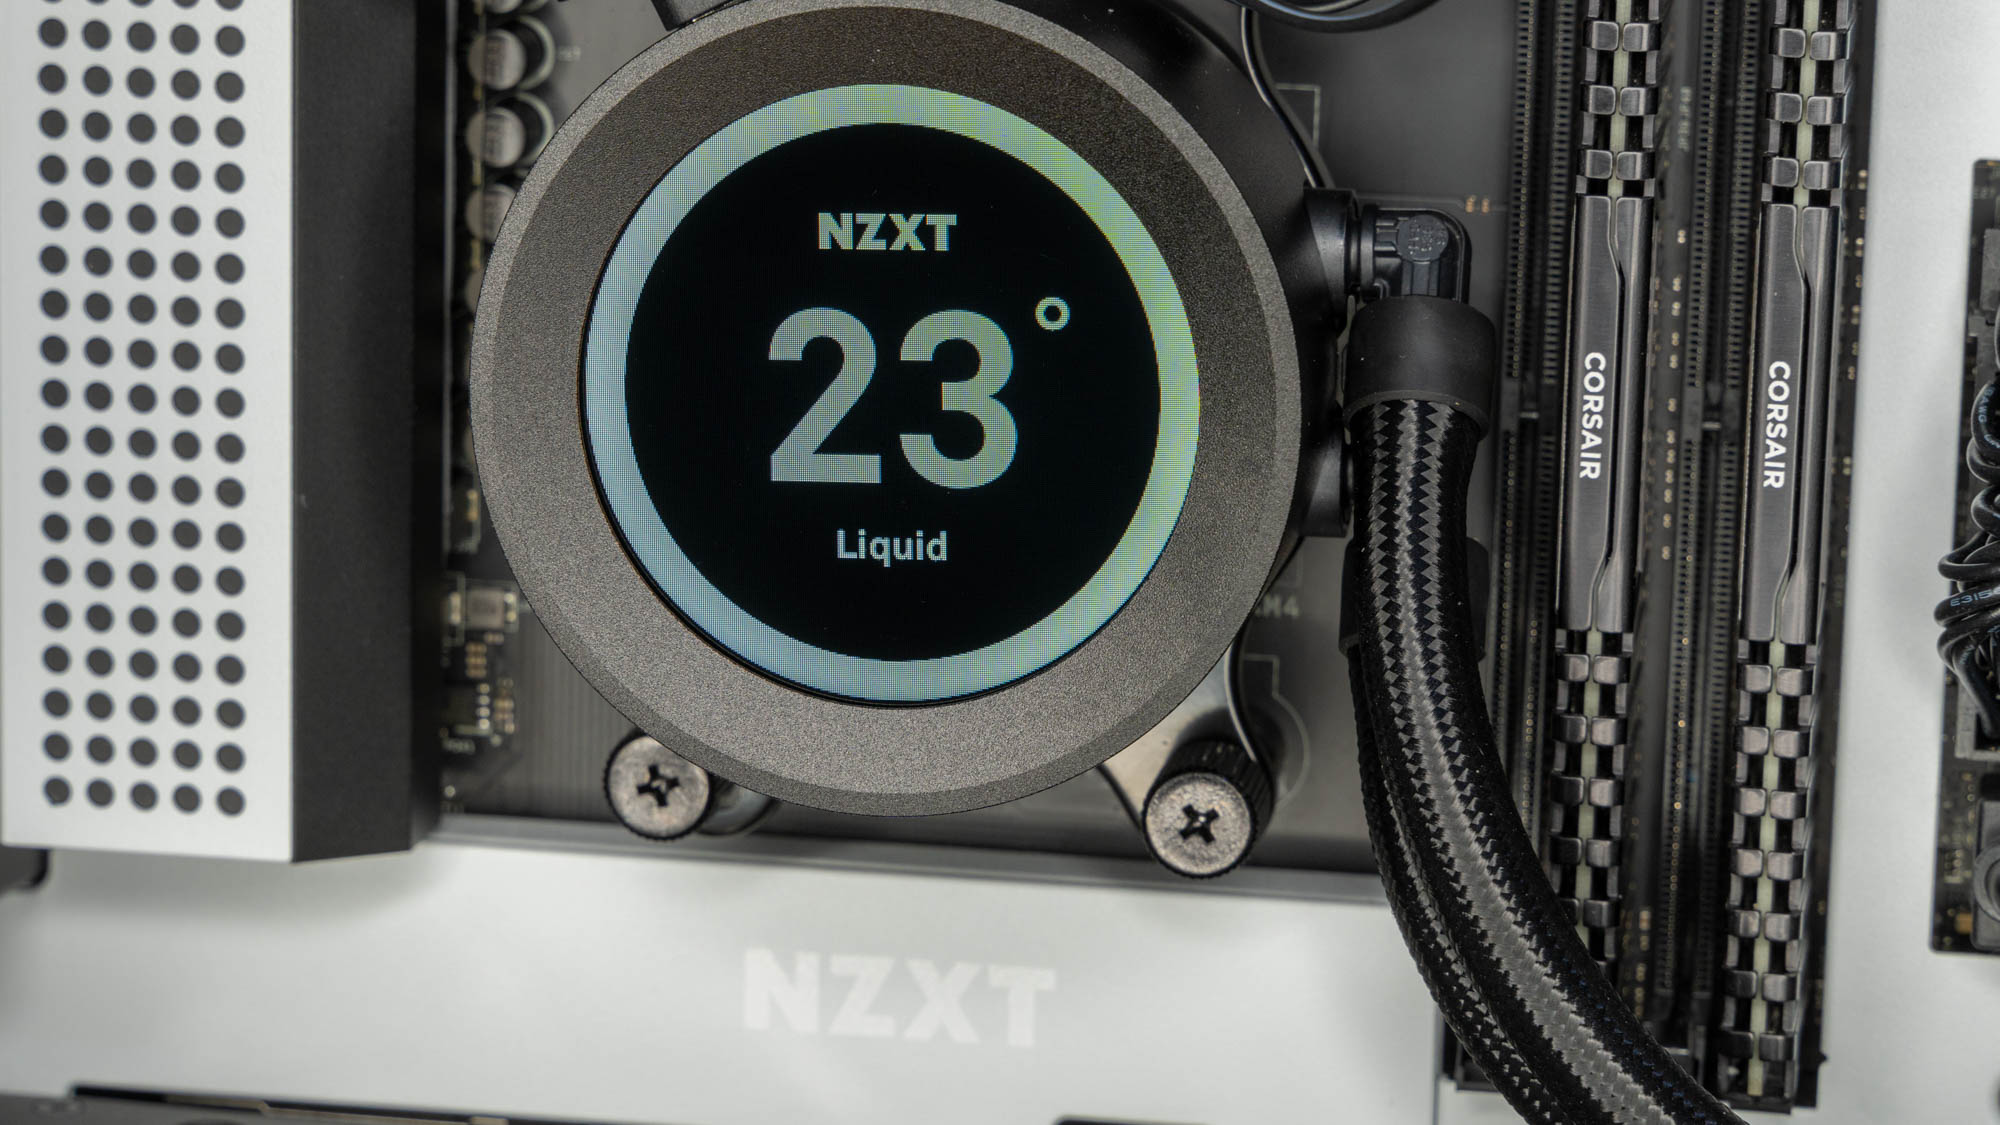 NZXT N7 B550 has Zen 3 compatibility in a beautiful package - 9to5Toys